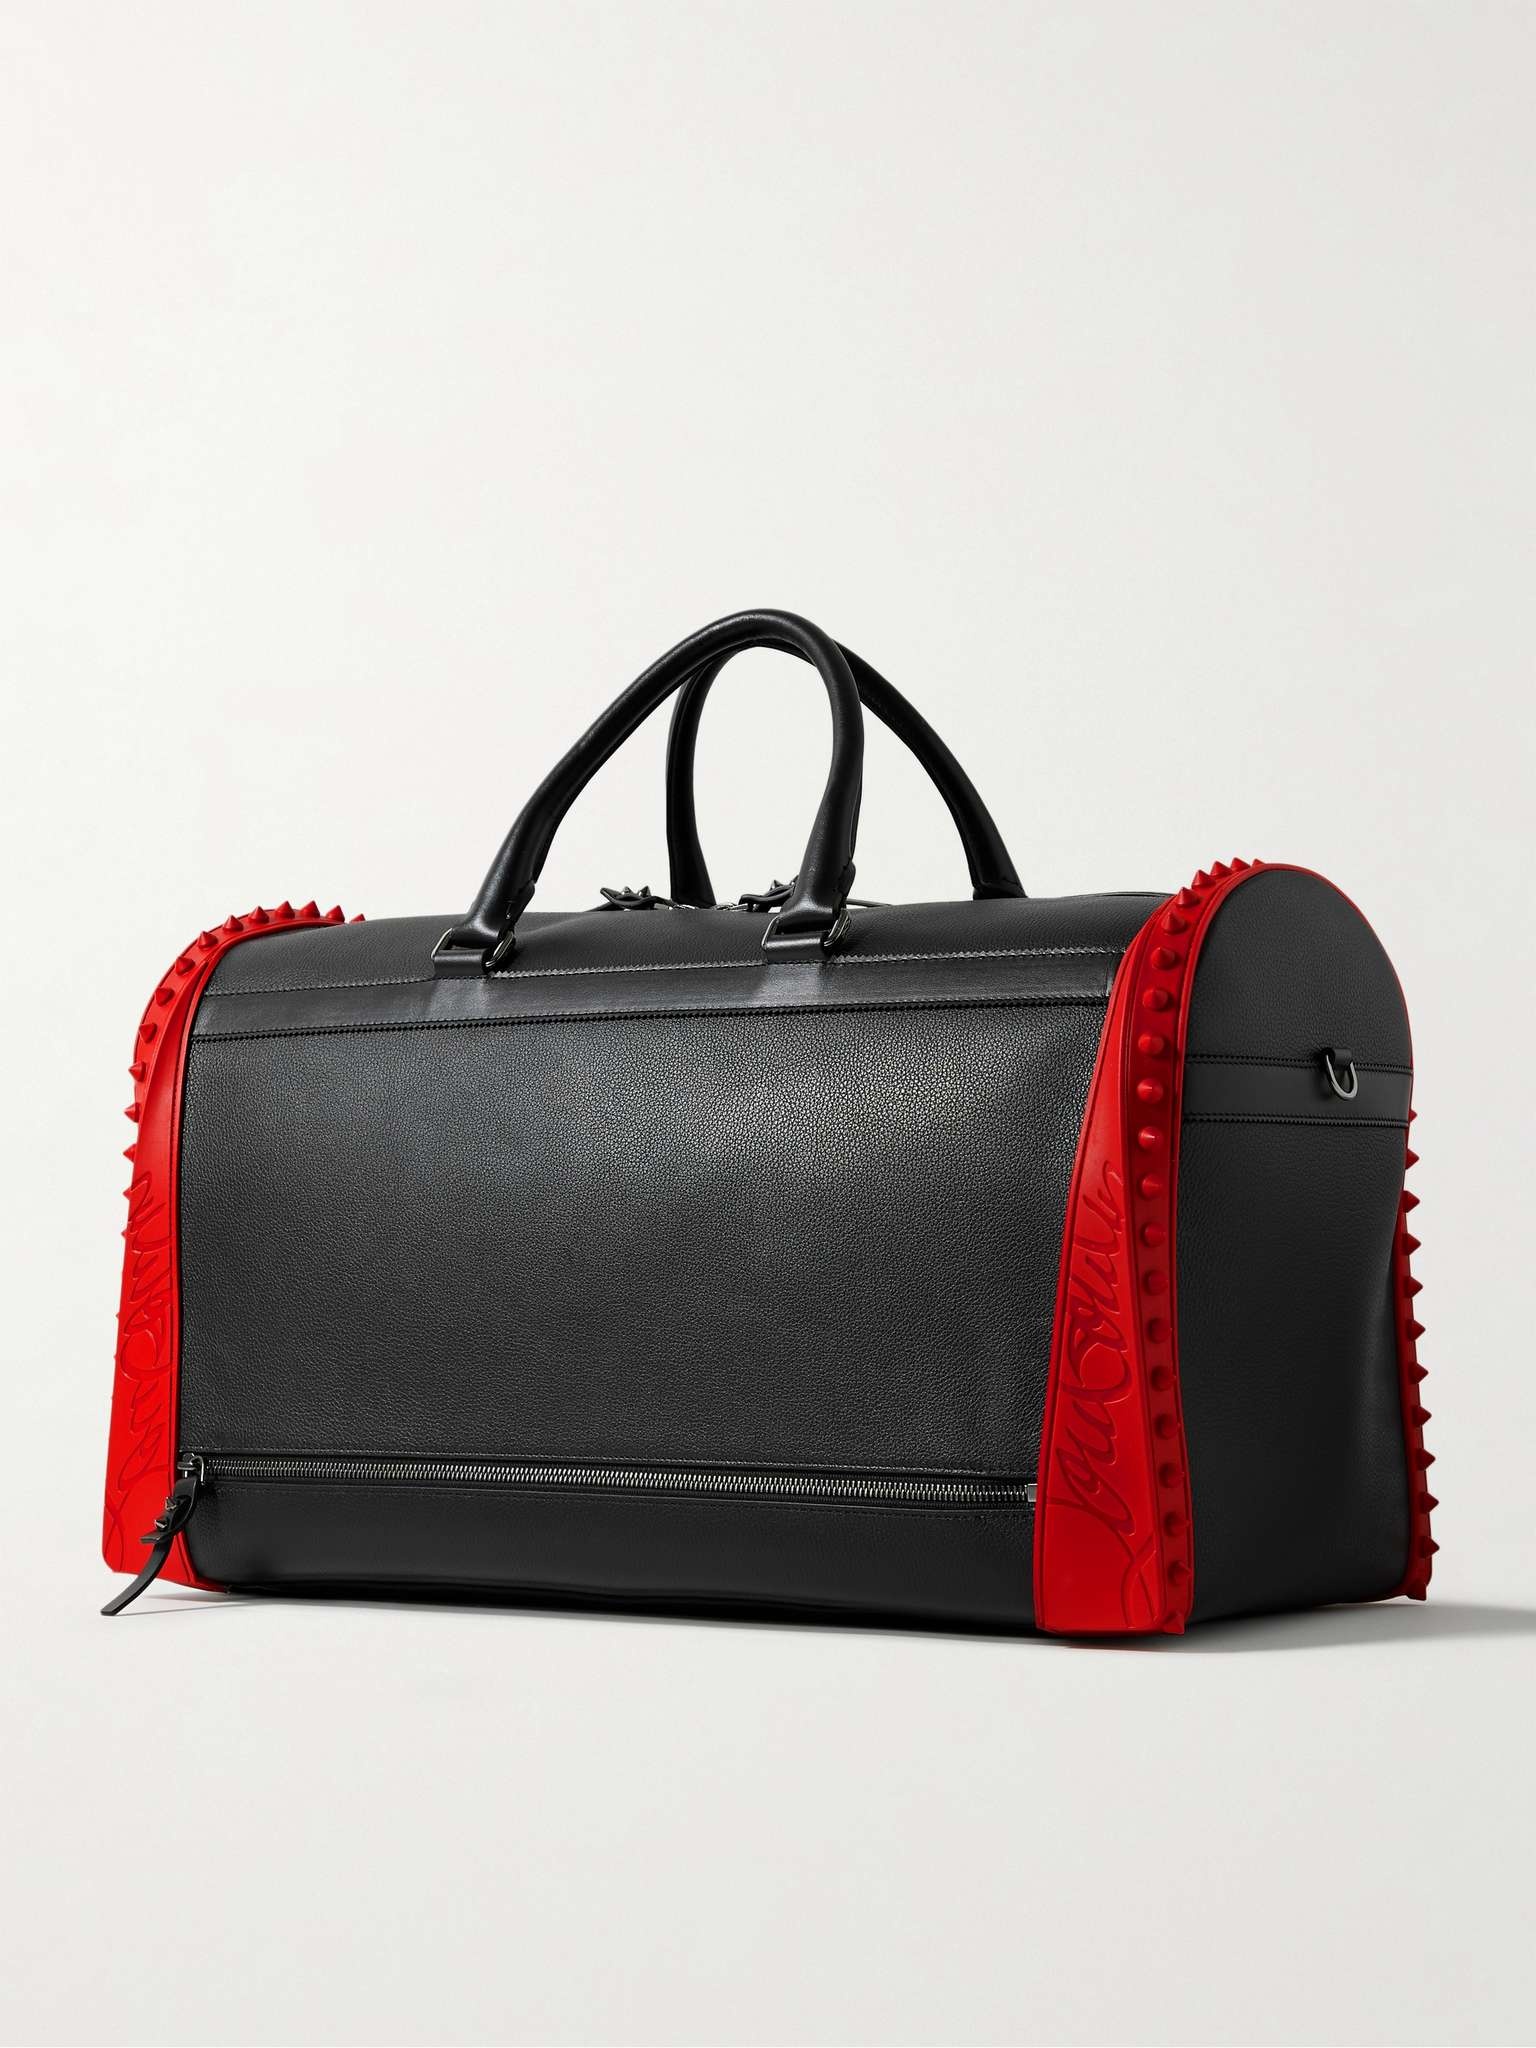 CHRISTIAN LOUBOUTIN Studded Leather and Rubber Tote for Men